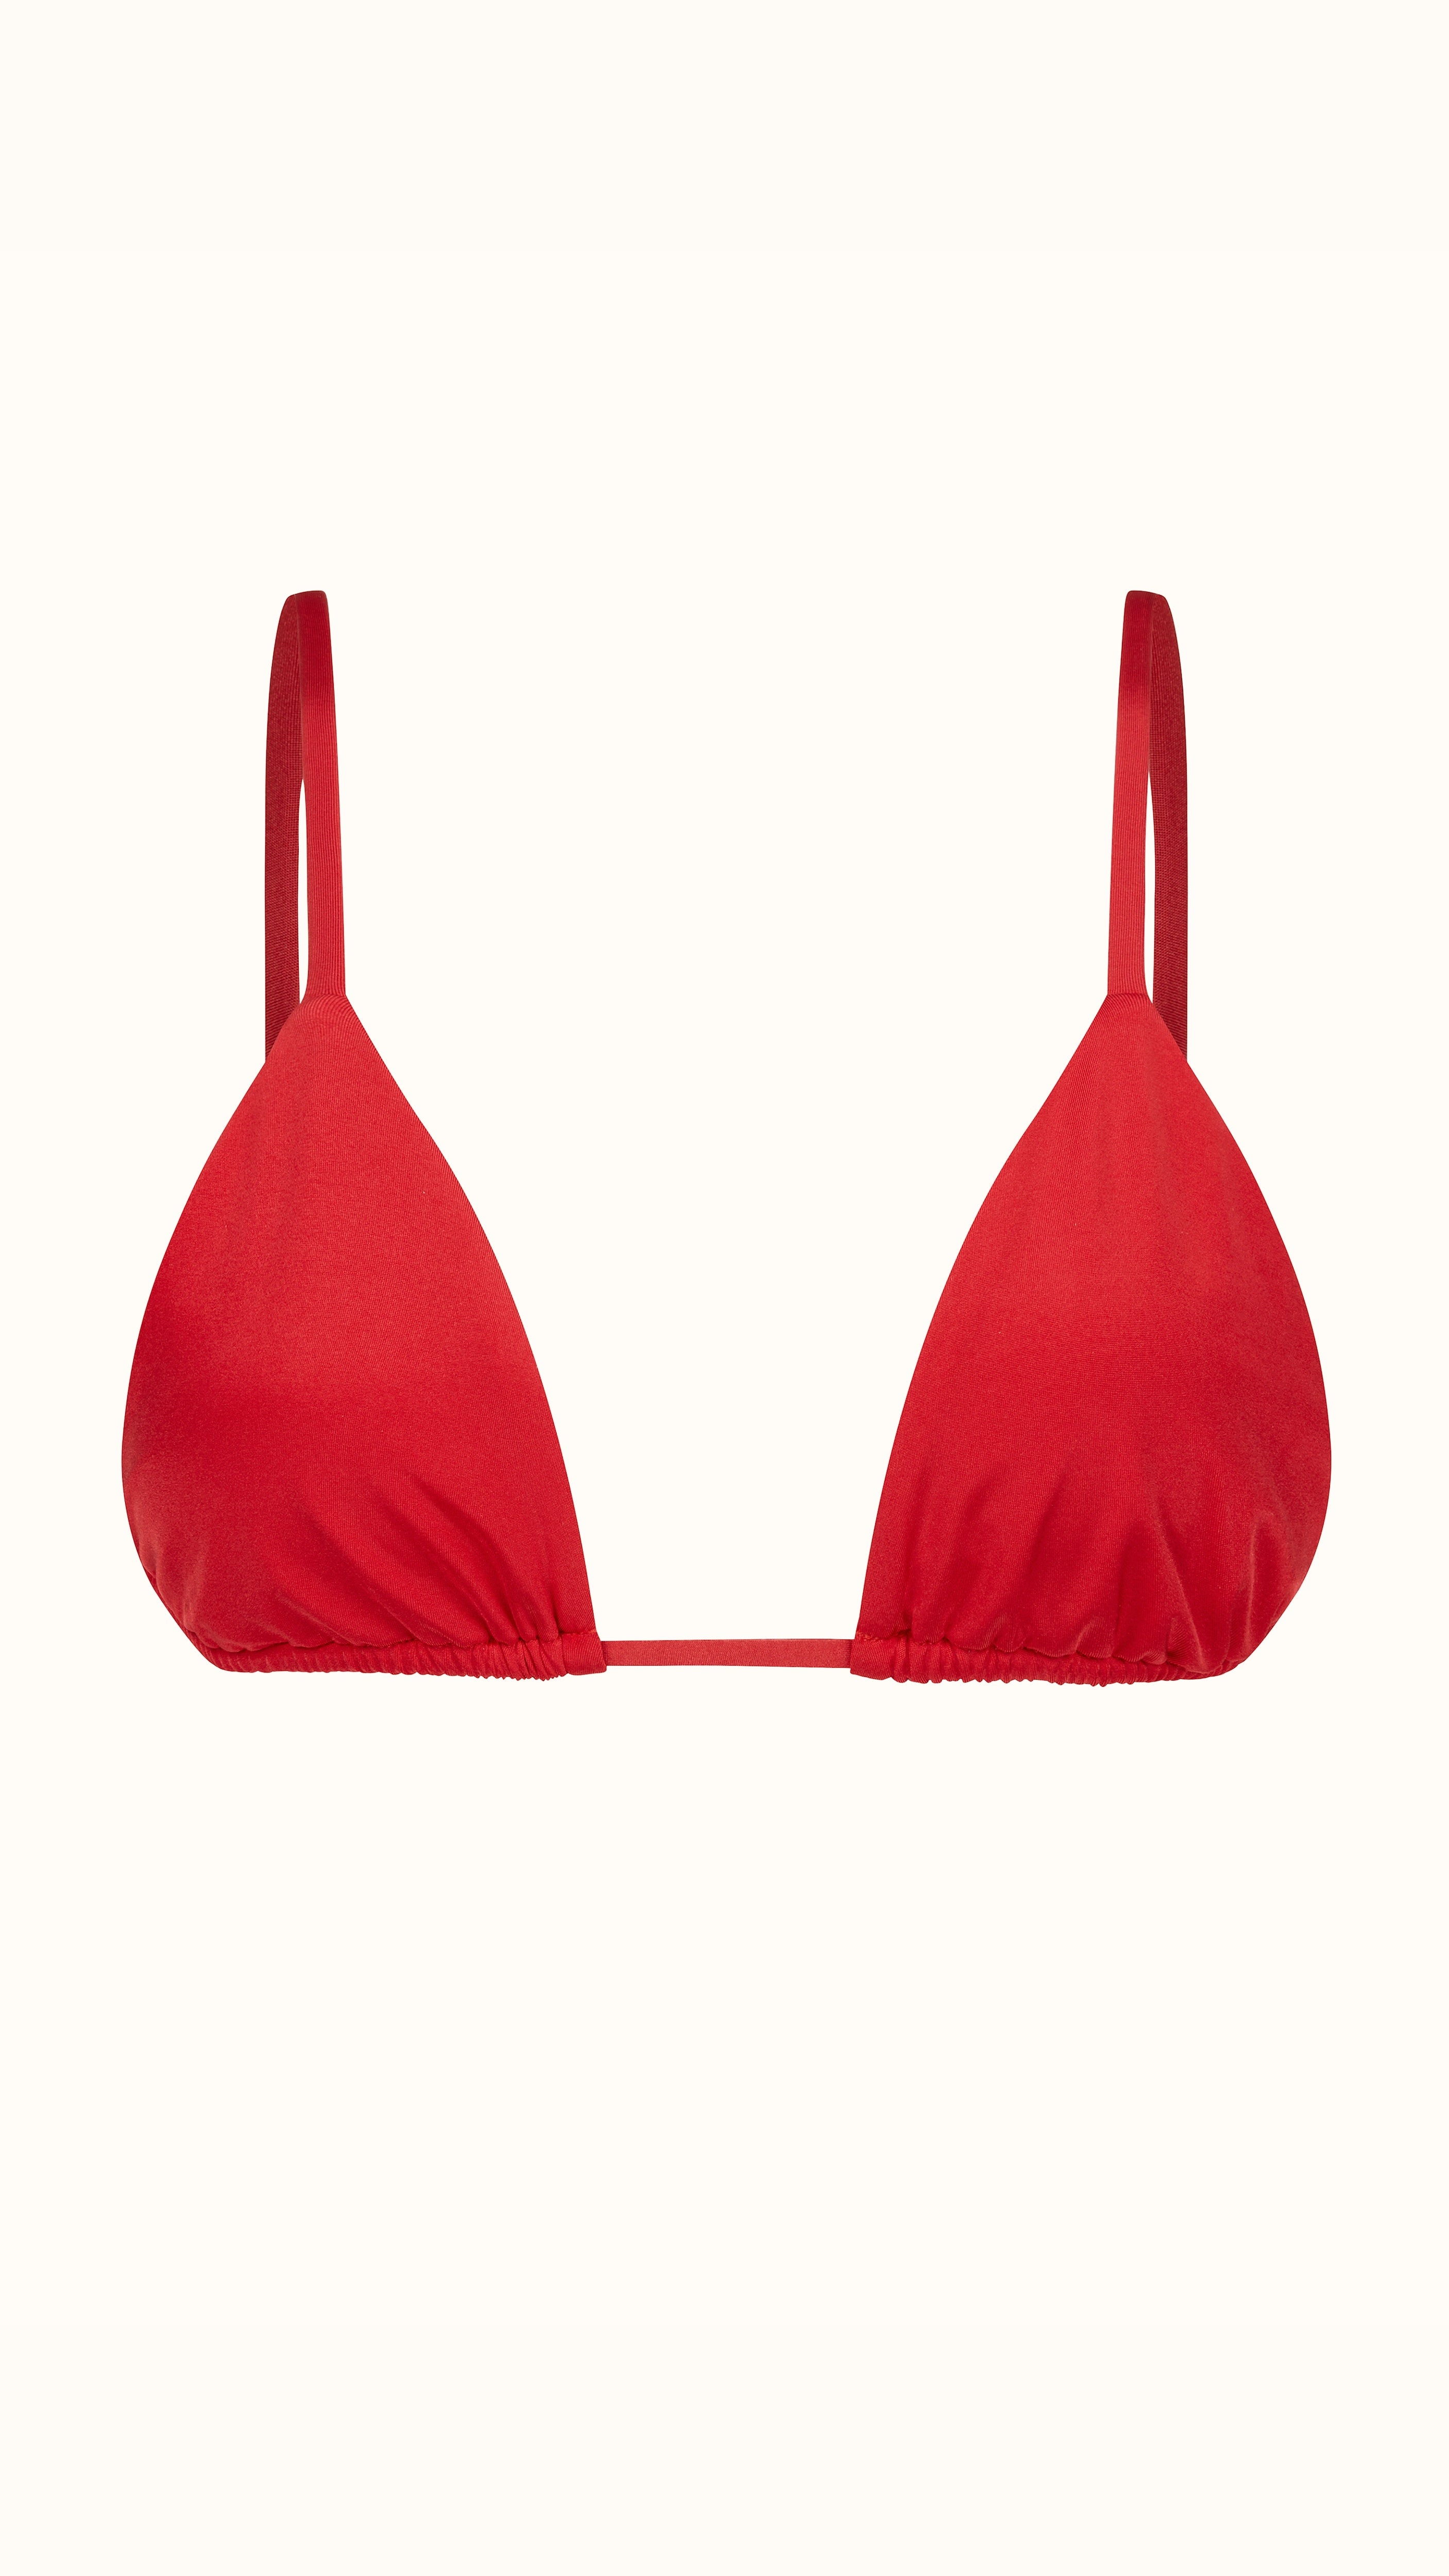 Talia Collins The Triangle Top in Red. Sustainable swimwear made from recycled materials. Classic tie triangle bra bikini top in red. V neck coverage bikini bathing suit top. Adjustable straps from shoulder and neck styling. Experience 27 Madrid. Product photo front view.